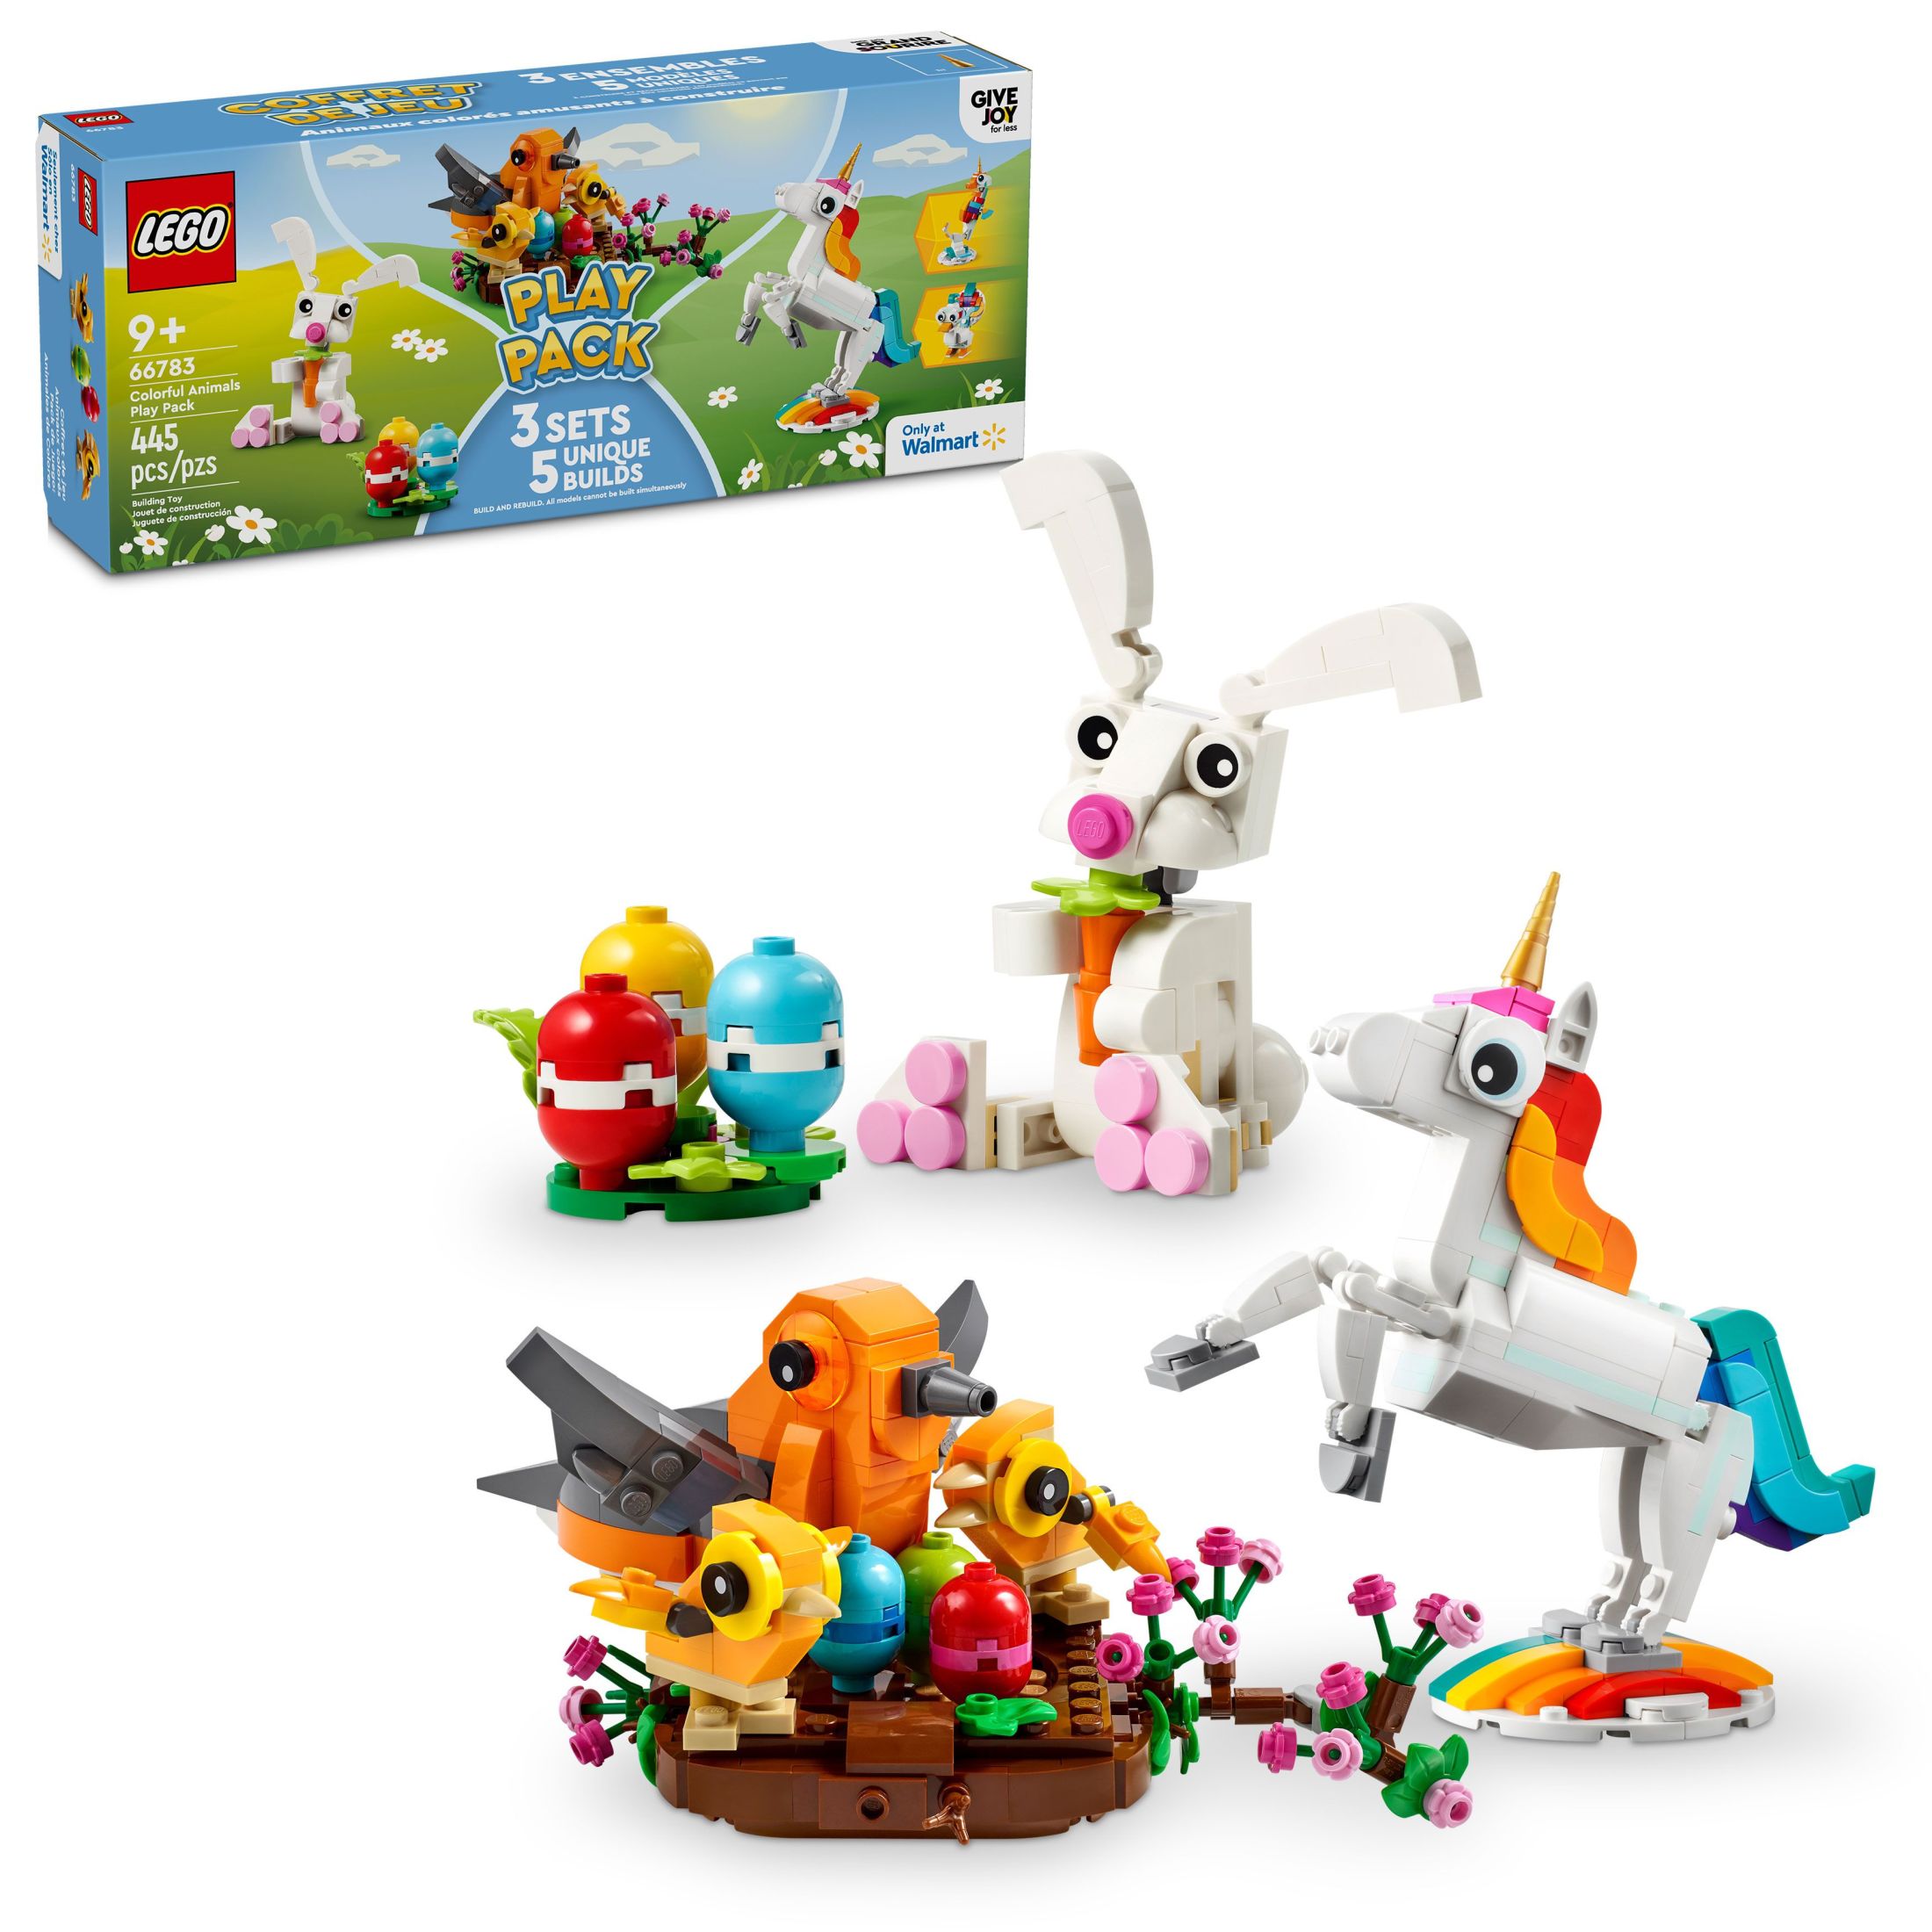 LEGO Colorful Animals Play Pack, 5 Adorable Animal Builds in 1 Box: Bunny Toy, Unicorn Toy, Seahorse Toy, Peacock Toy, and Birds in a Nest, Birthday Gift Idea for Animal Lovers, 66783 - image 1 of 8